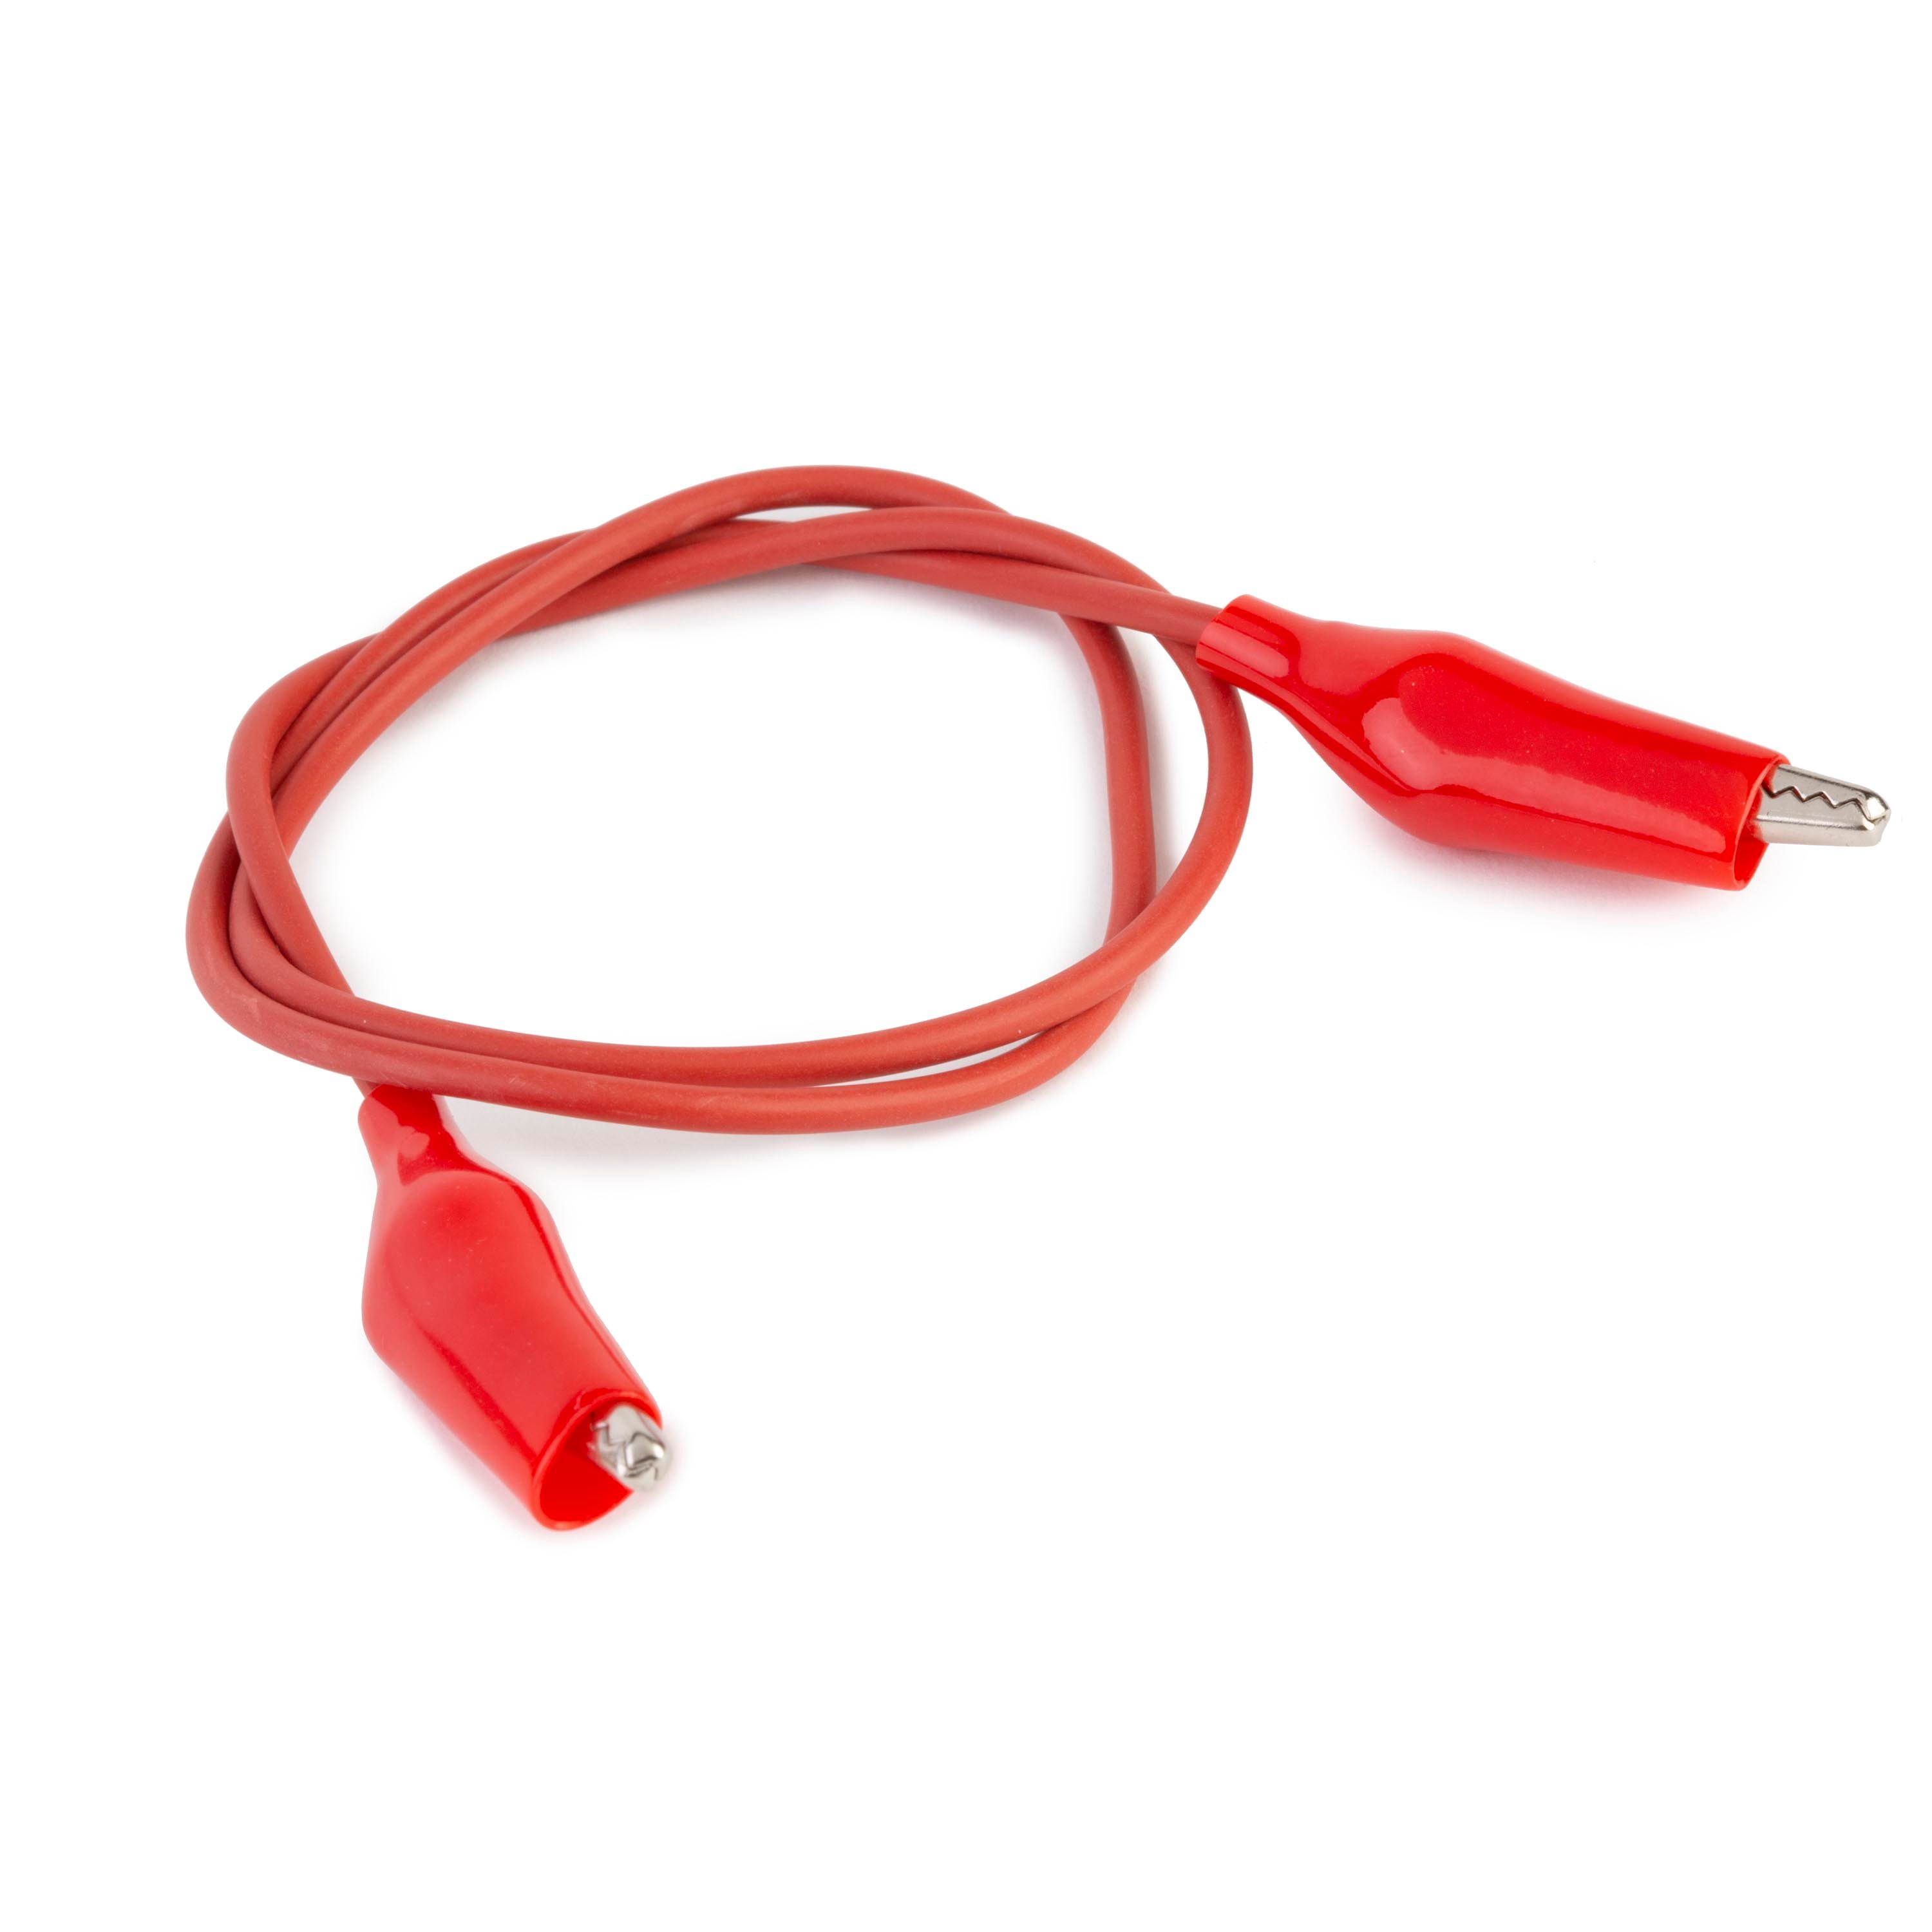 Test Leads - 10 Pack